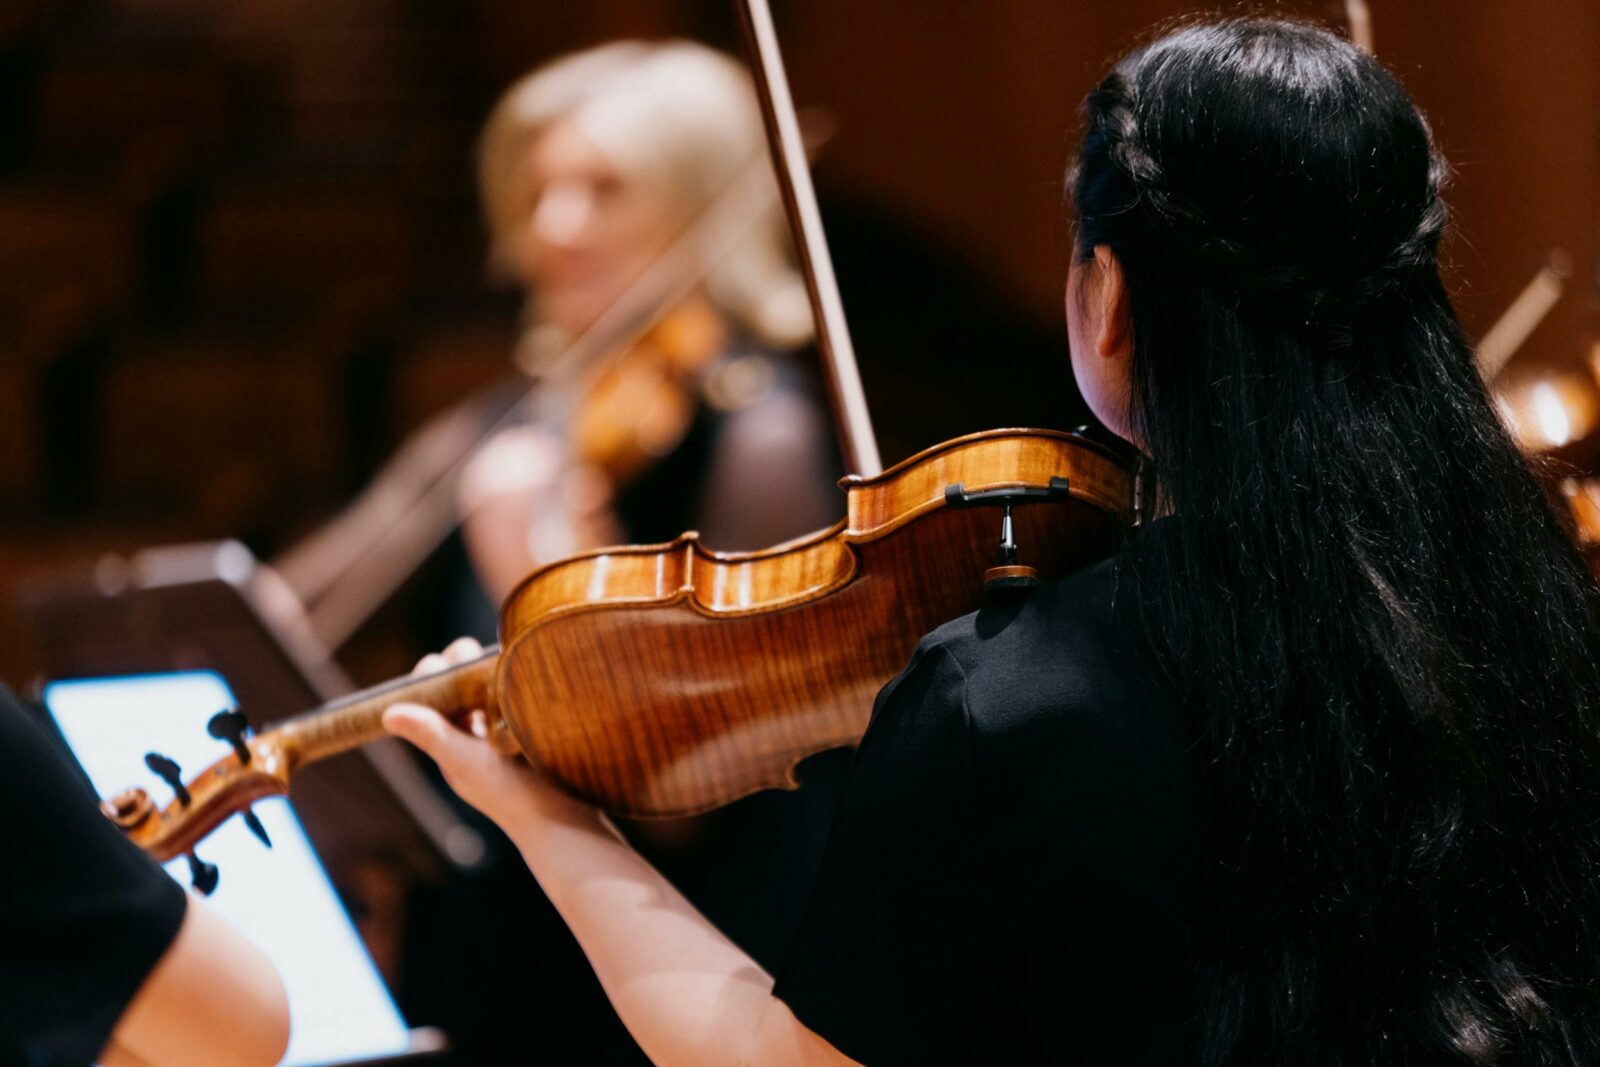 The back of a person with long hair holding a violin among other musicians seen in the background